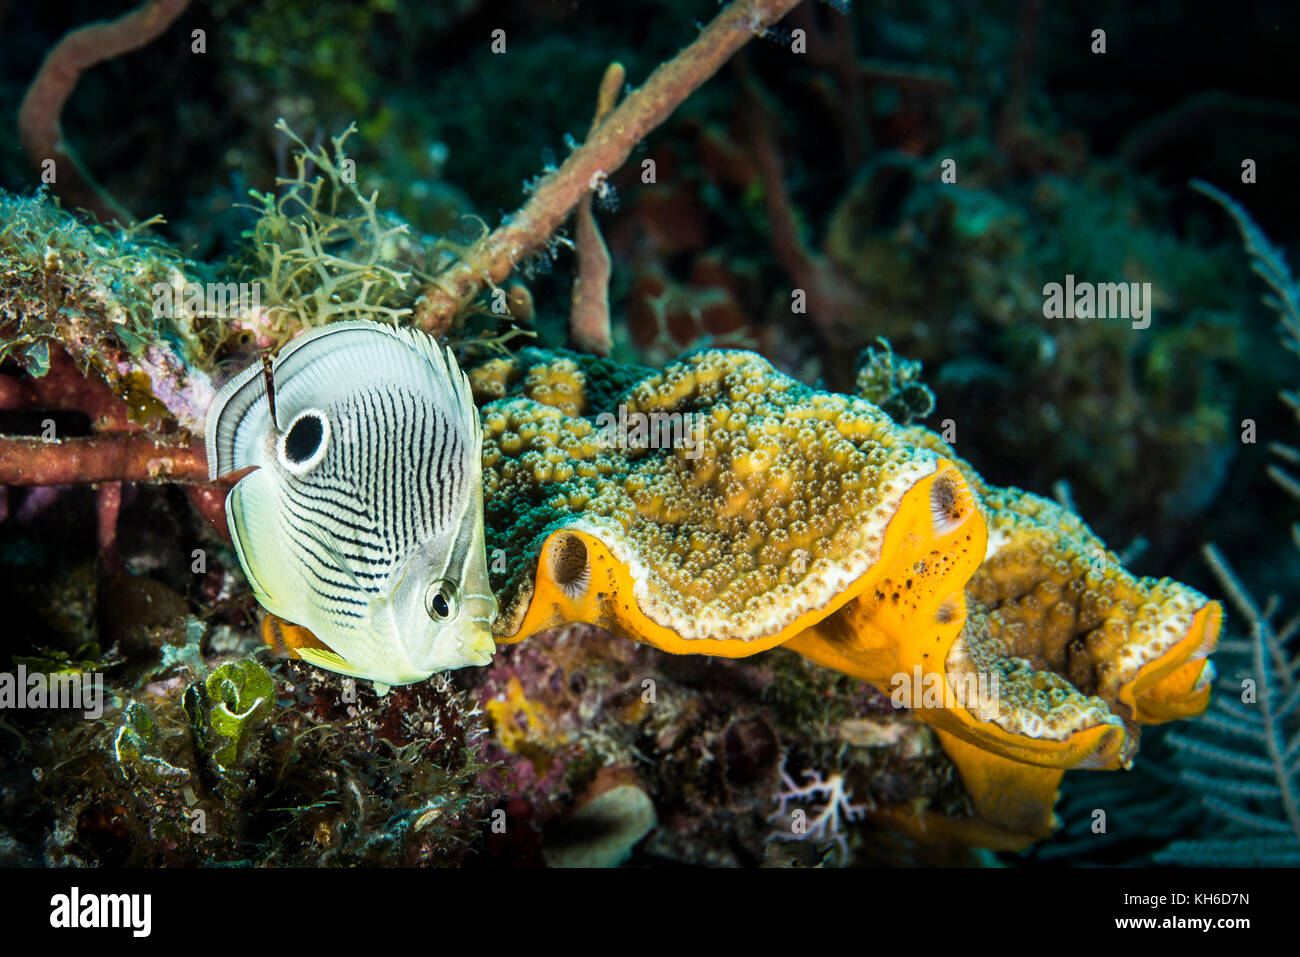 Underwater seascape and Foureye Butterflyfish at Little Cayman Stock Photo